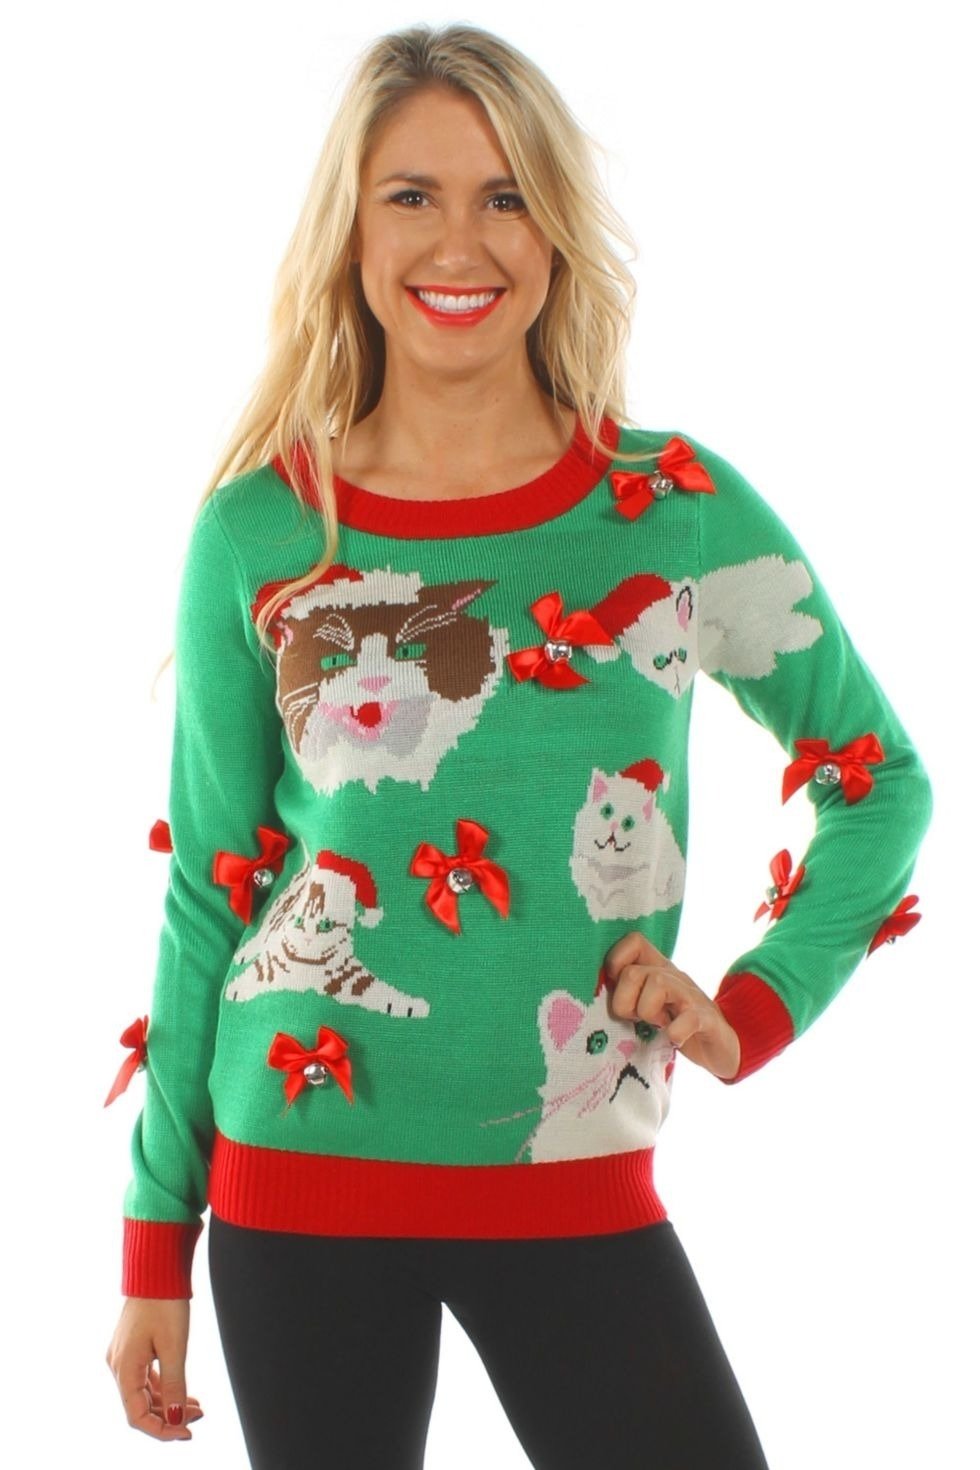 10 Ideal Diy Ugly Christmas Sweater Ideas 23 ugly christmas sweater ideas to buy and diy tacky christmas in 2022